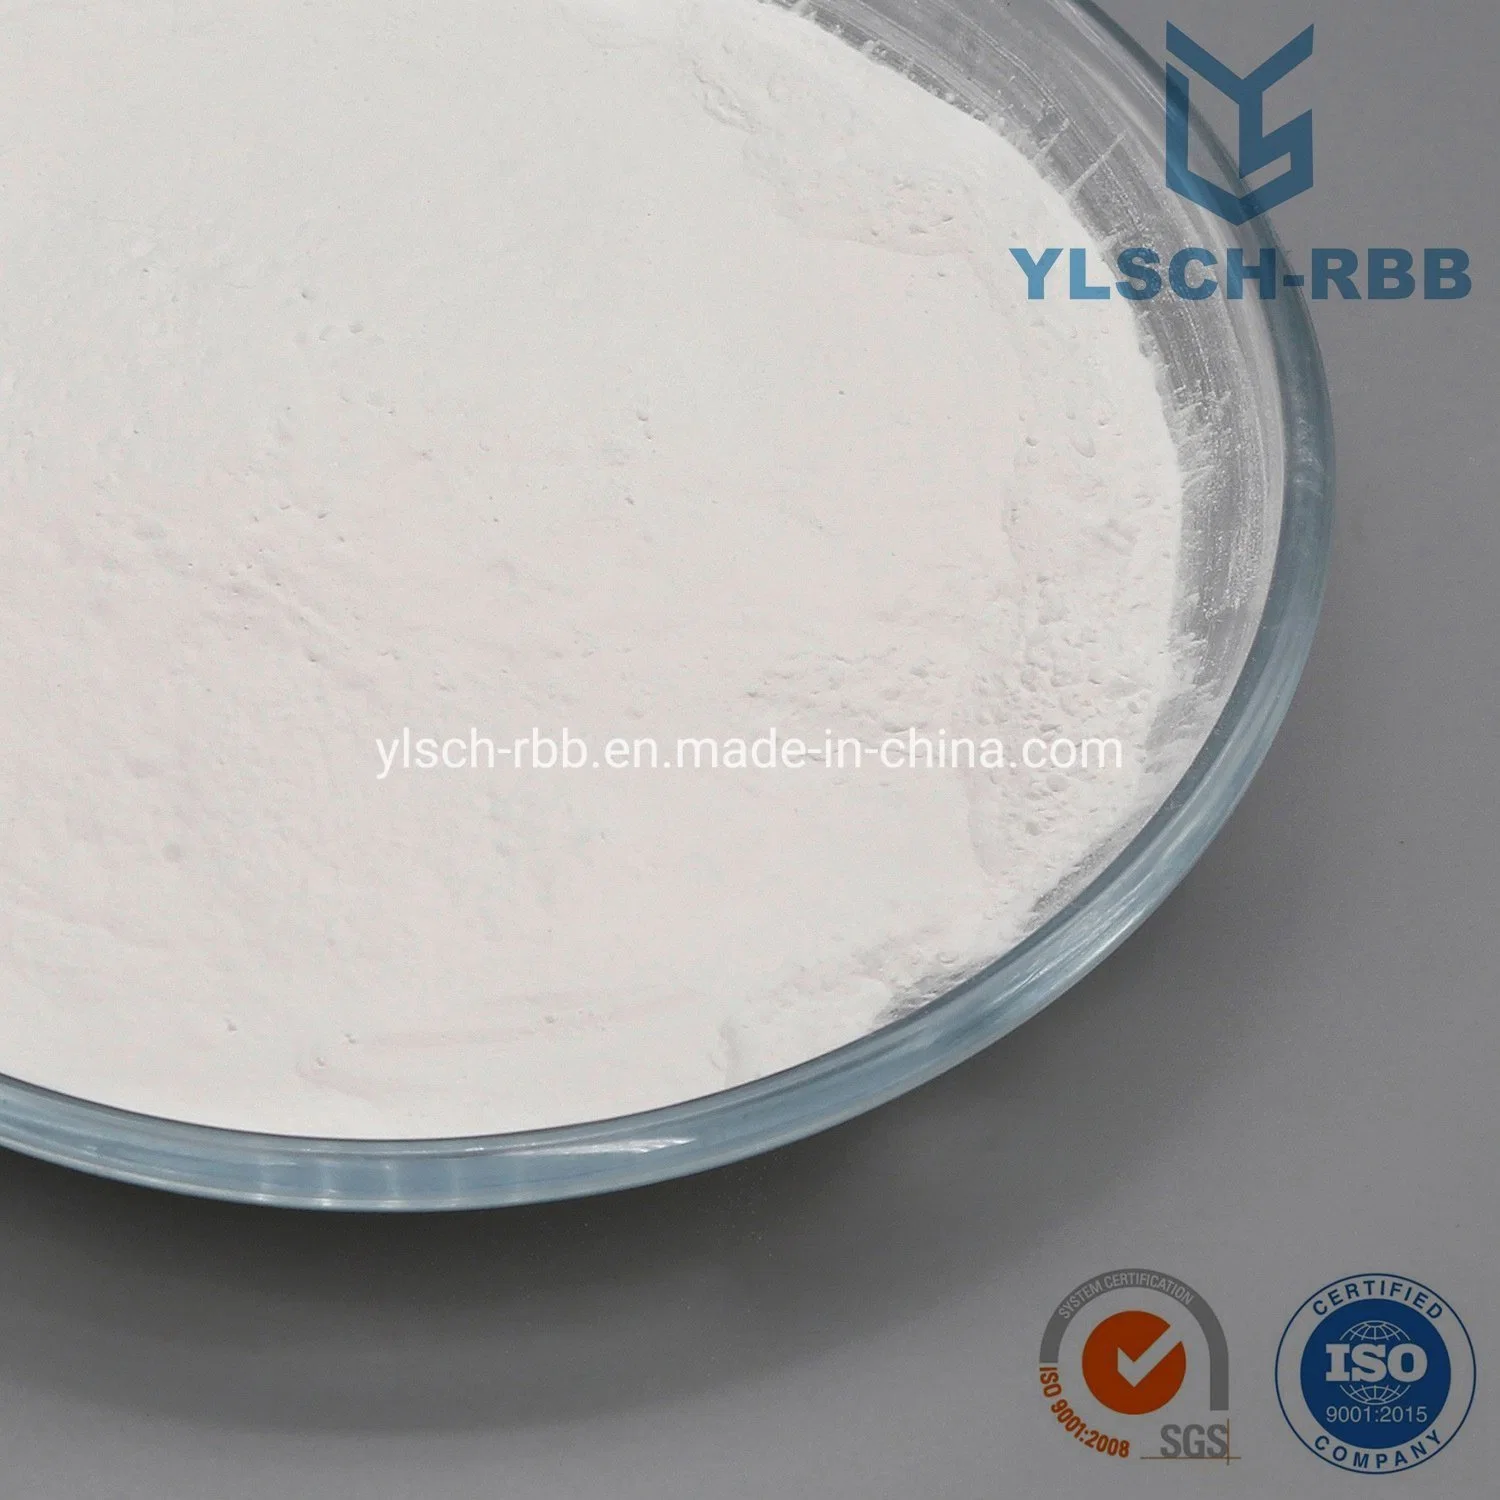 Rubber Antioxidant 1076 for Tire